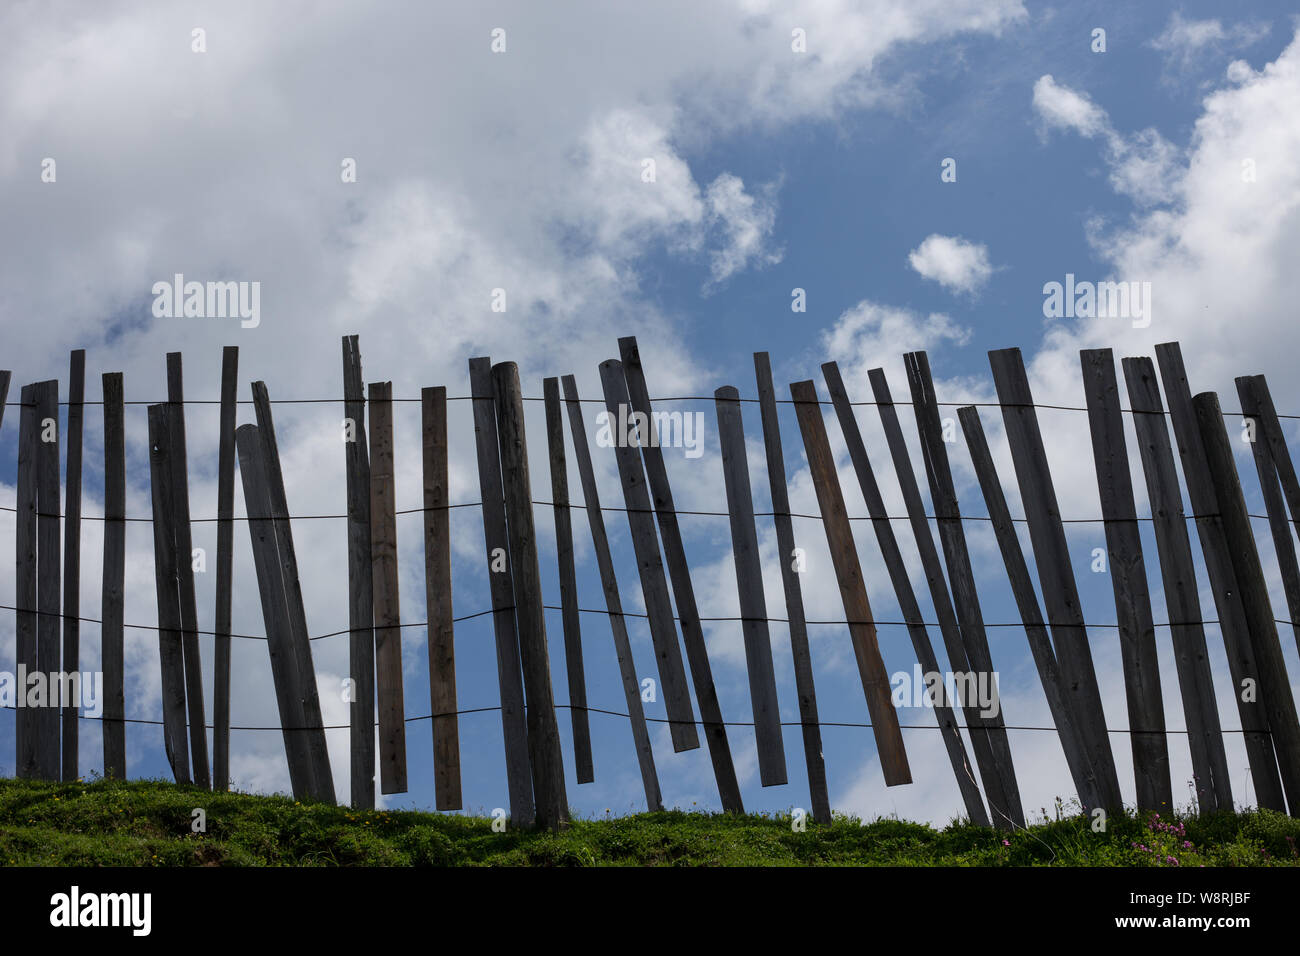 A wooden post and wire fence silhouetted against blue sky and clouds Stock Photo